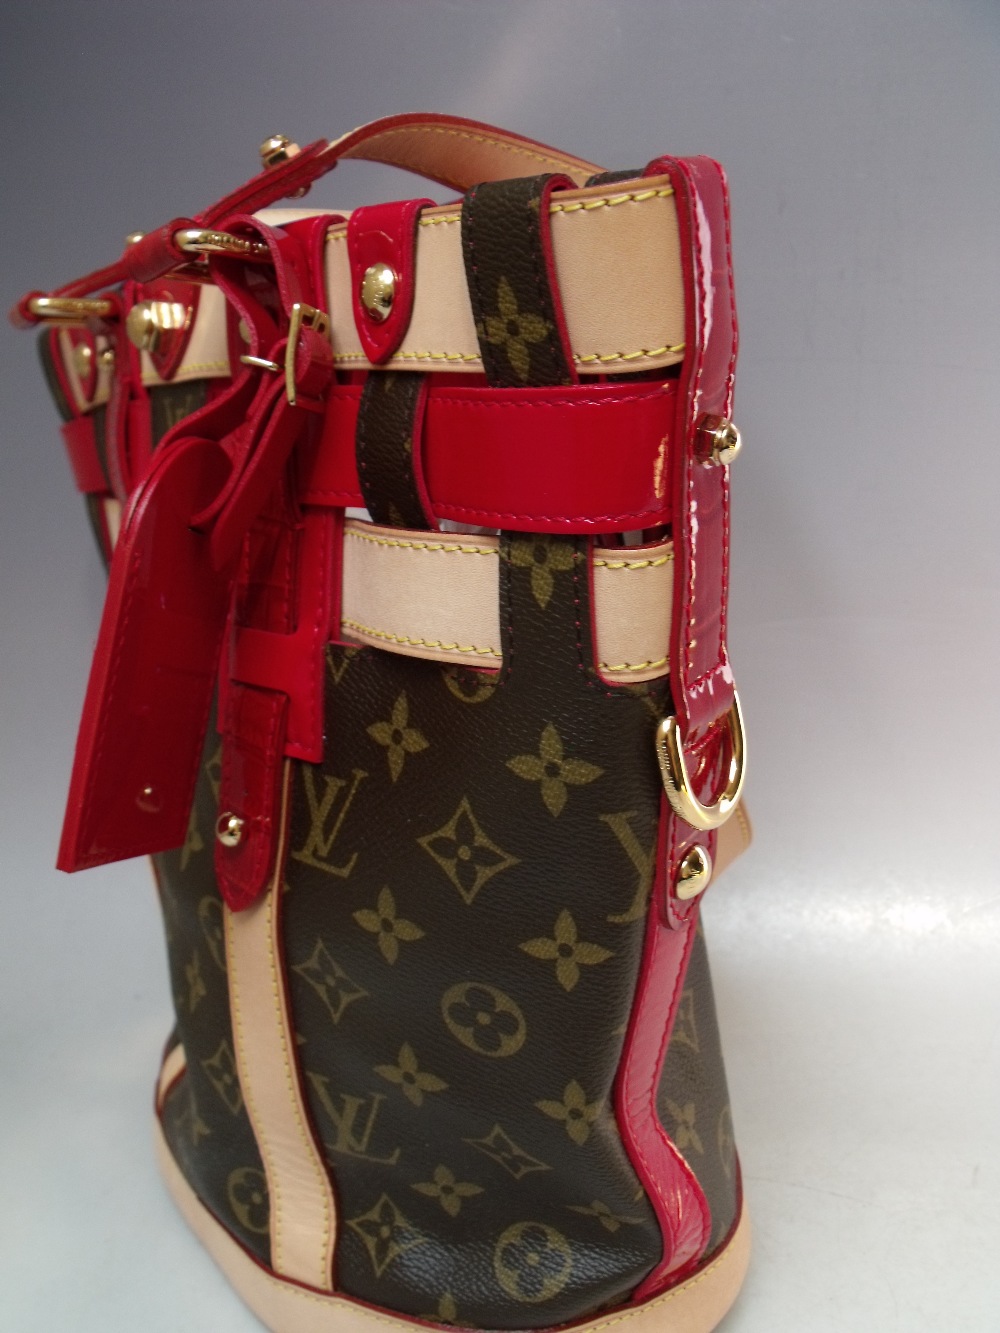 A LOUIS VUITTON RUBIS SALINA PM BAG, with double top handles, natural leather trim and red patent - Image 3 of 7